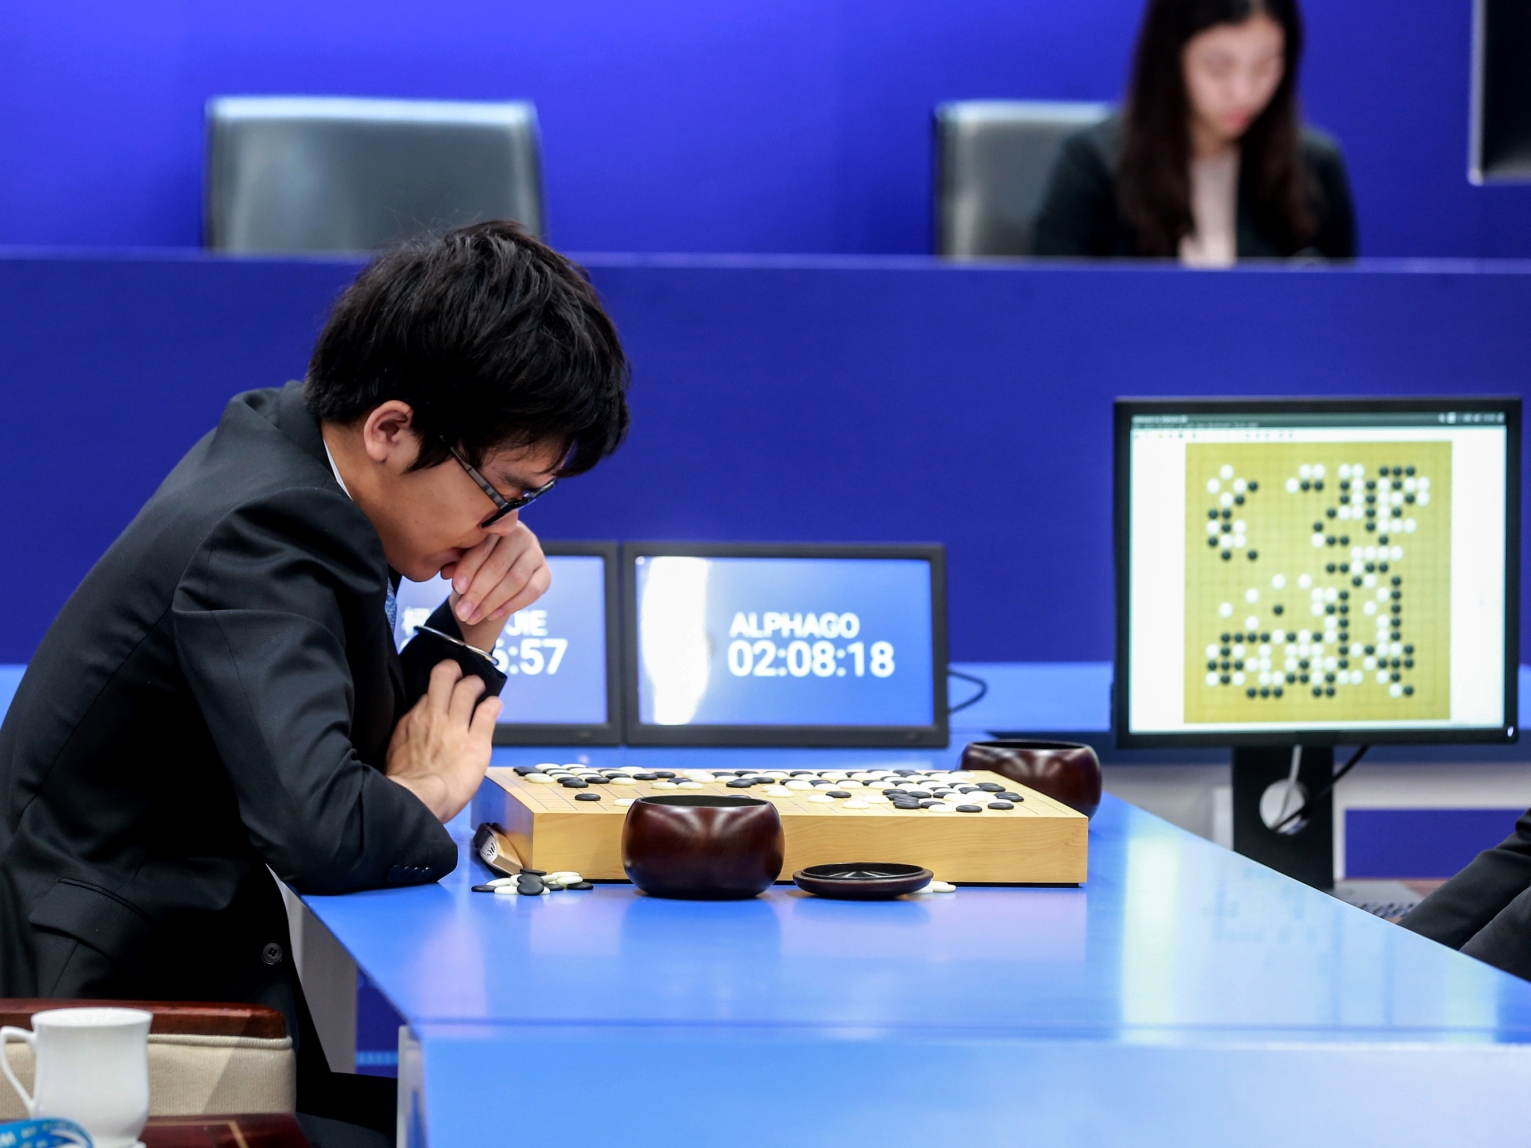 China's 19-year-old Go player Ke Jie prepares to make a move during the second match against Google's artificial intelligence program AlphaGo in Wuzhen, in eastern China's Zhejiang province on May 25, 2017. 